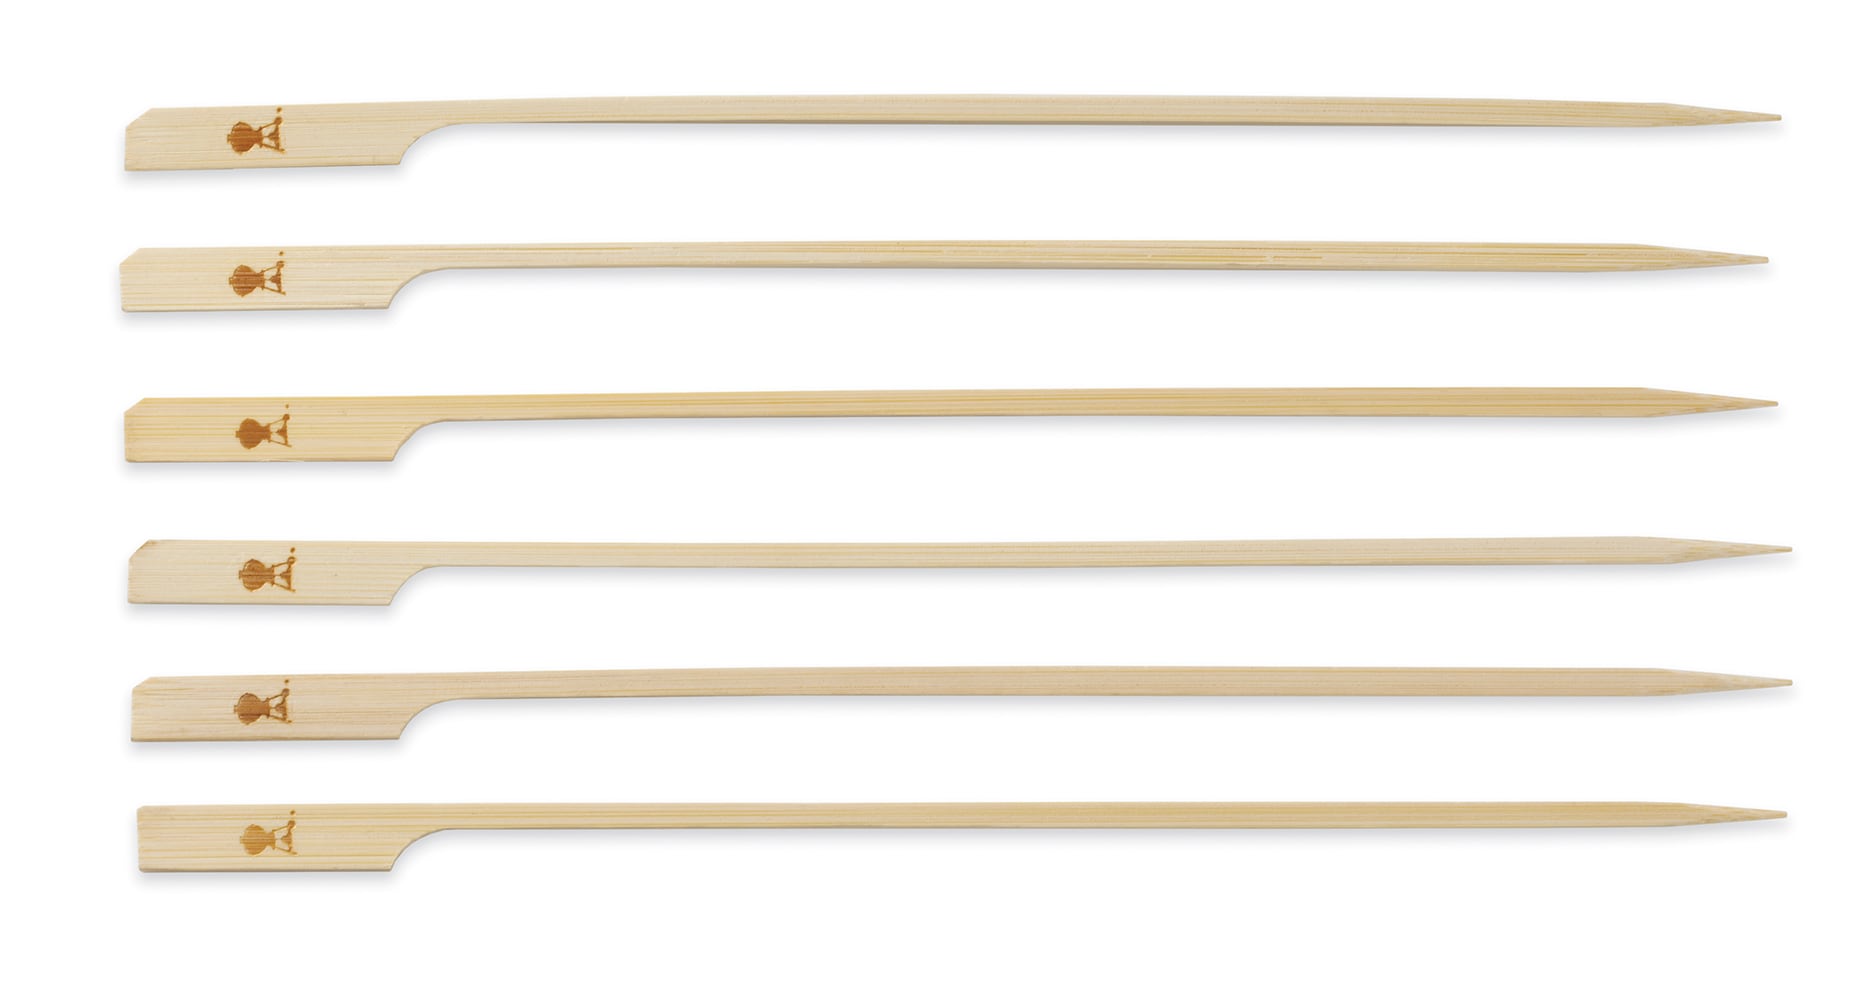 Details about   Bamboo Skewers 10Inch 24 packs-1pack=50pc 